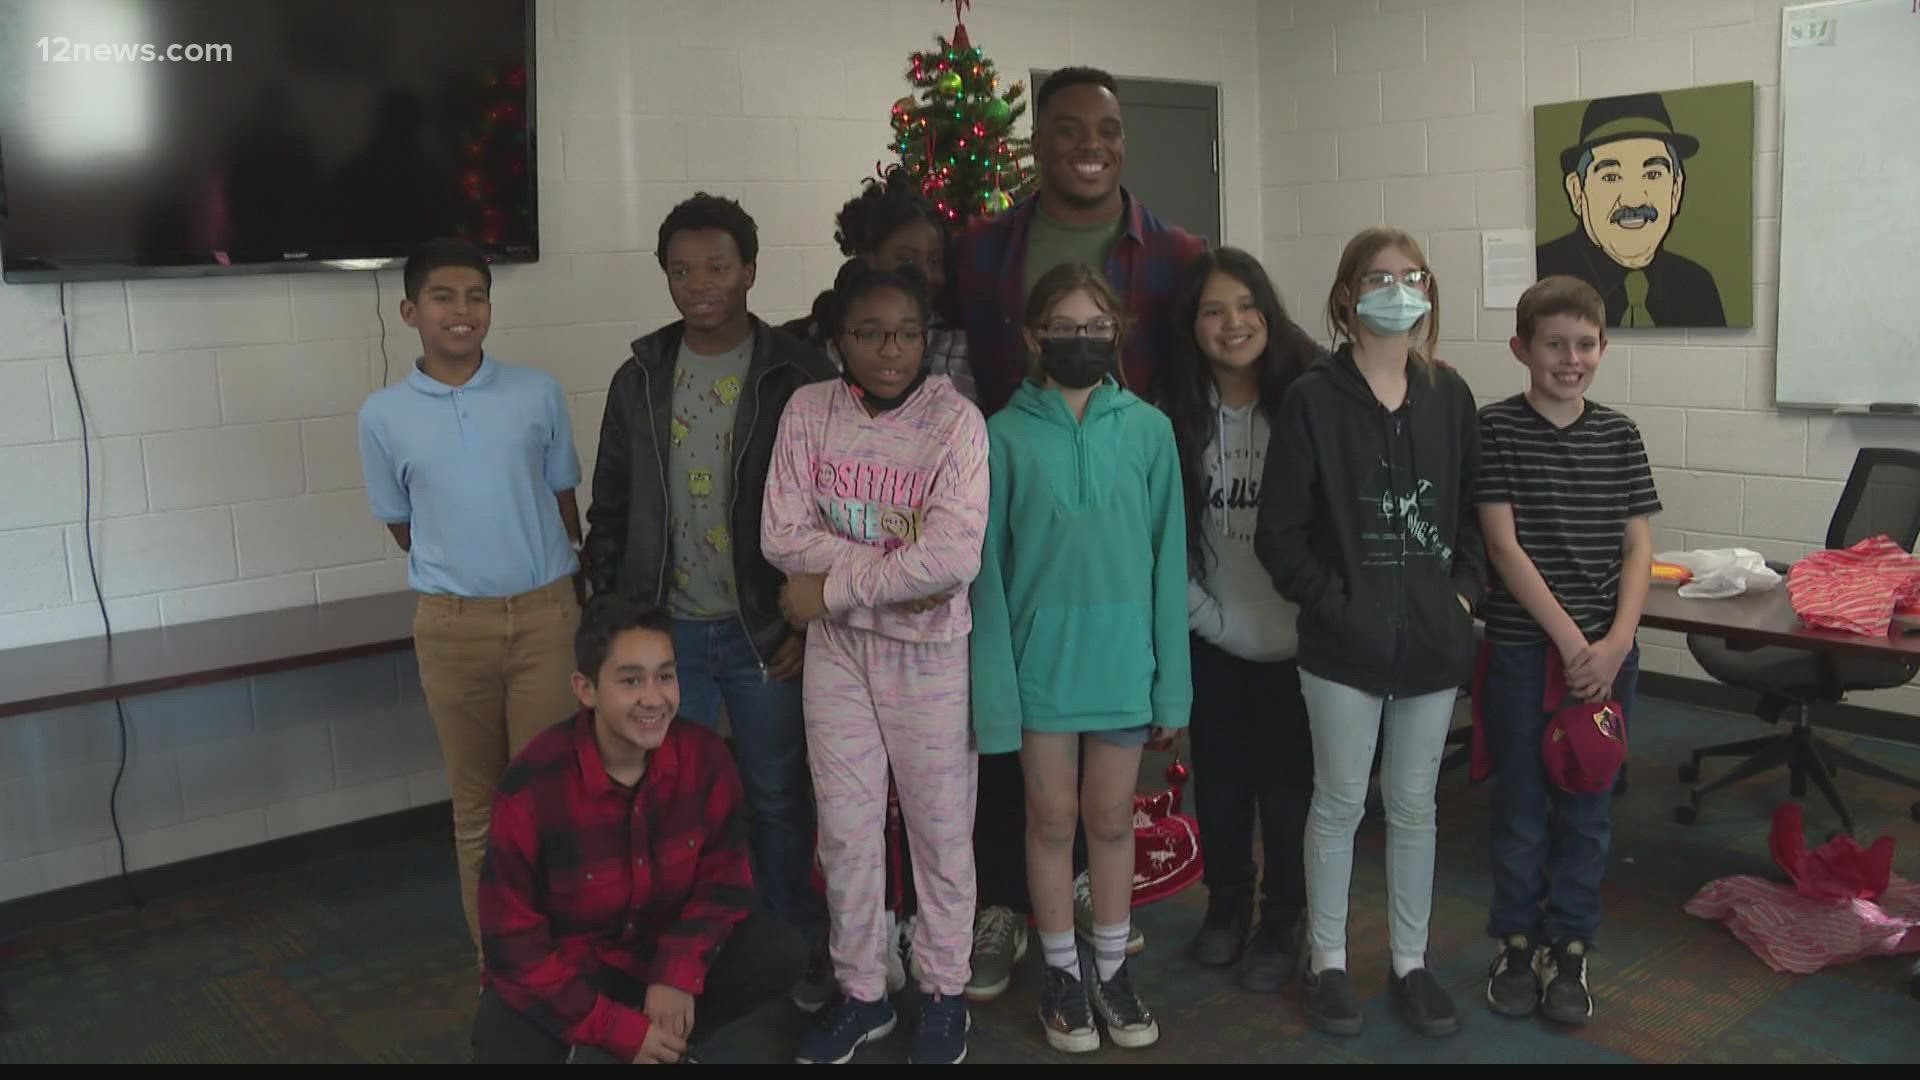 Kennard gave 10 lucky Valley kids a Target shopping spree, books and school supplies as a Christmas surprise